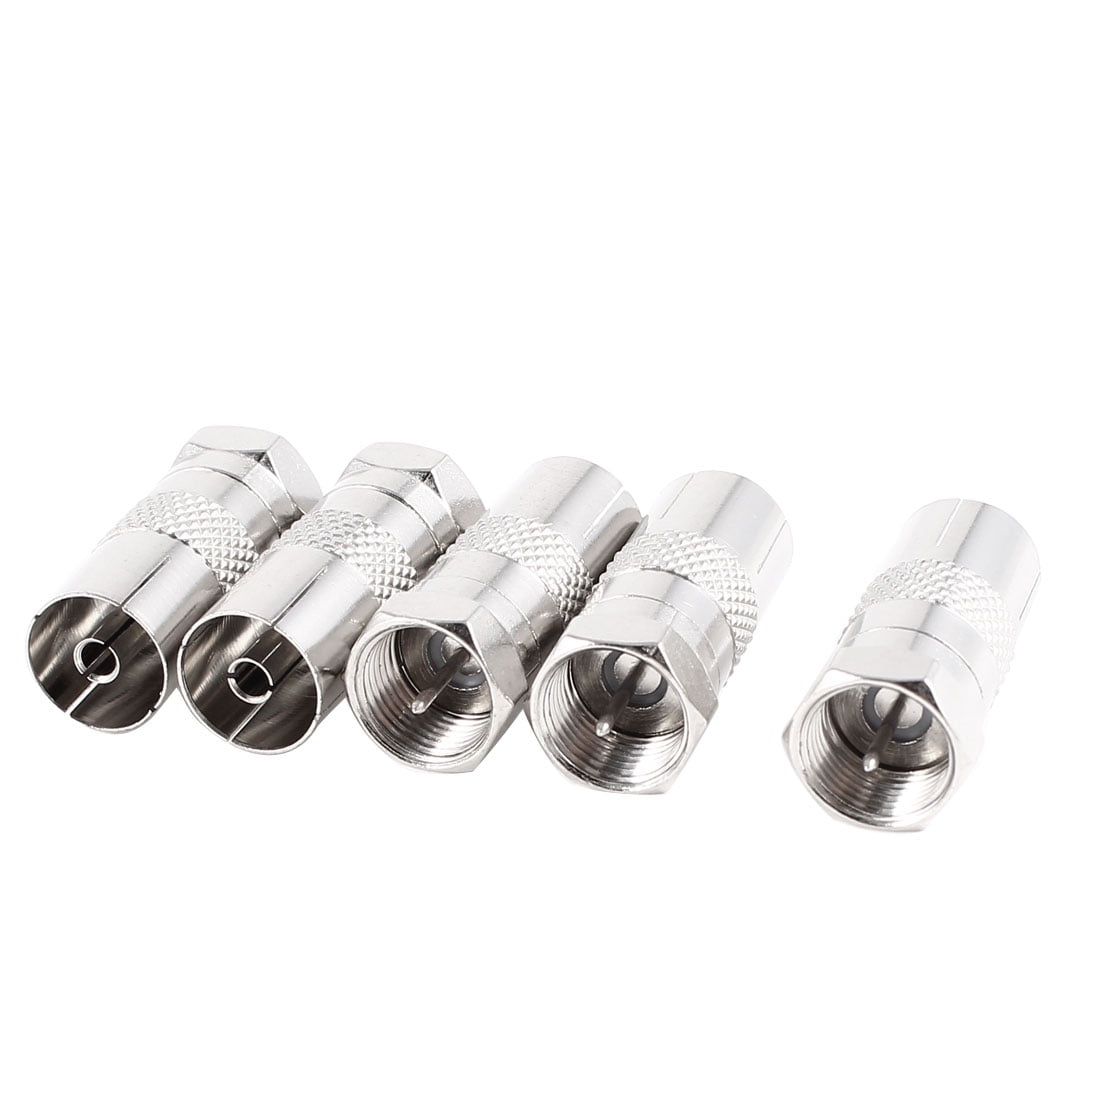 5Pcs F Type Female To TV Aerial RF Coaxial Male Connector Adapter Plug*-* ca 